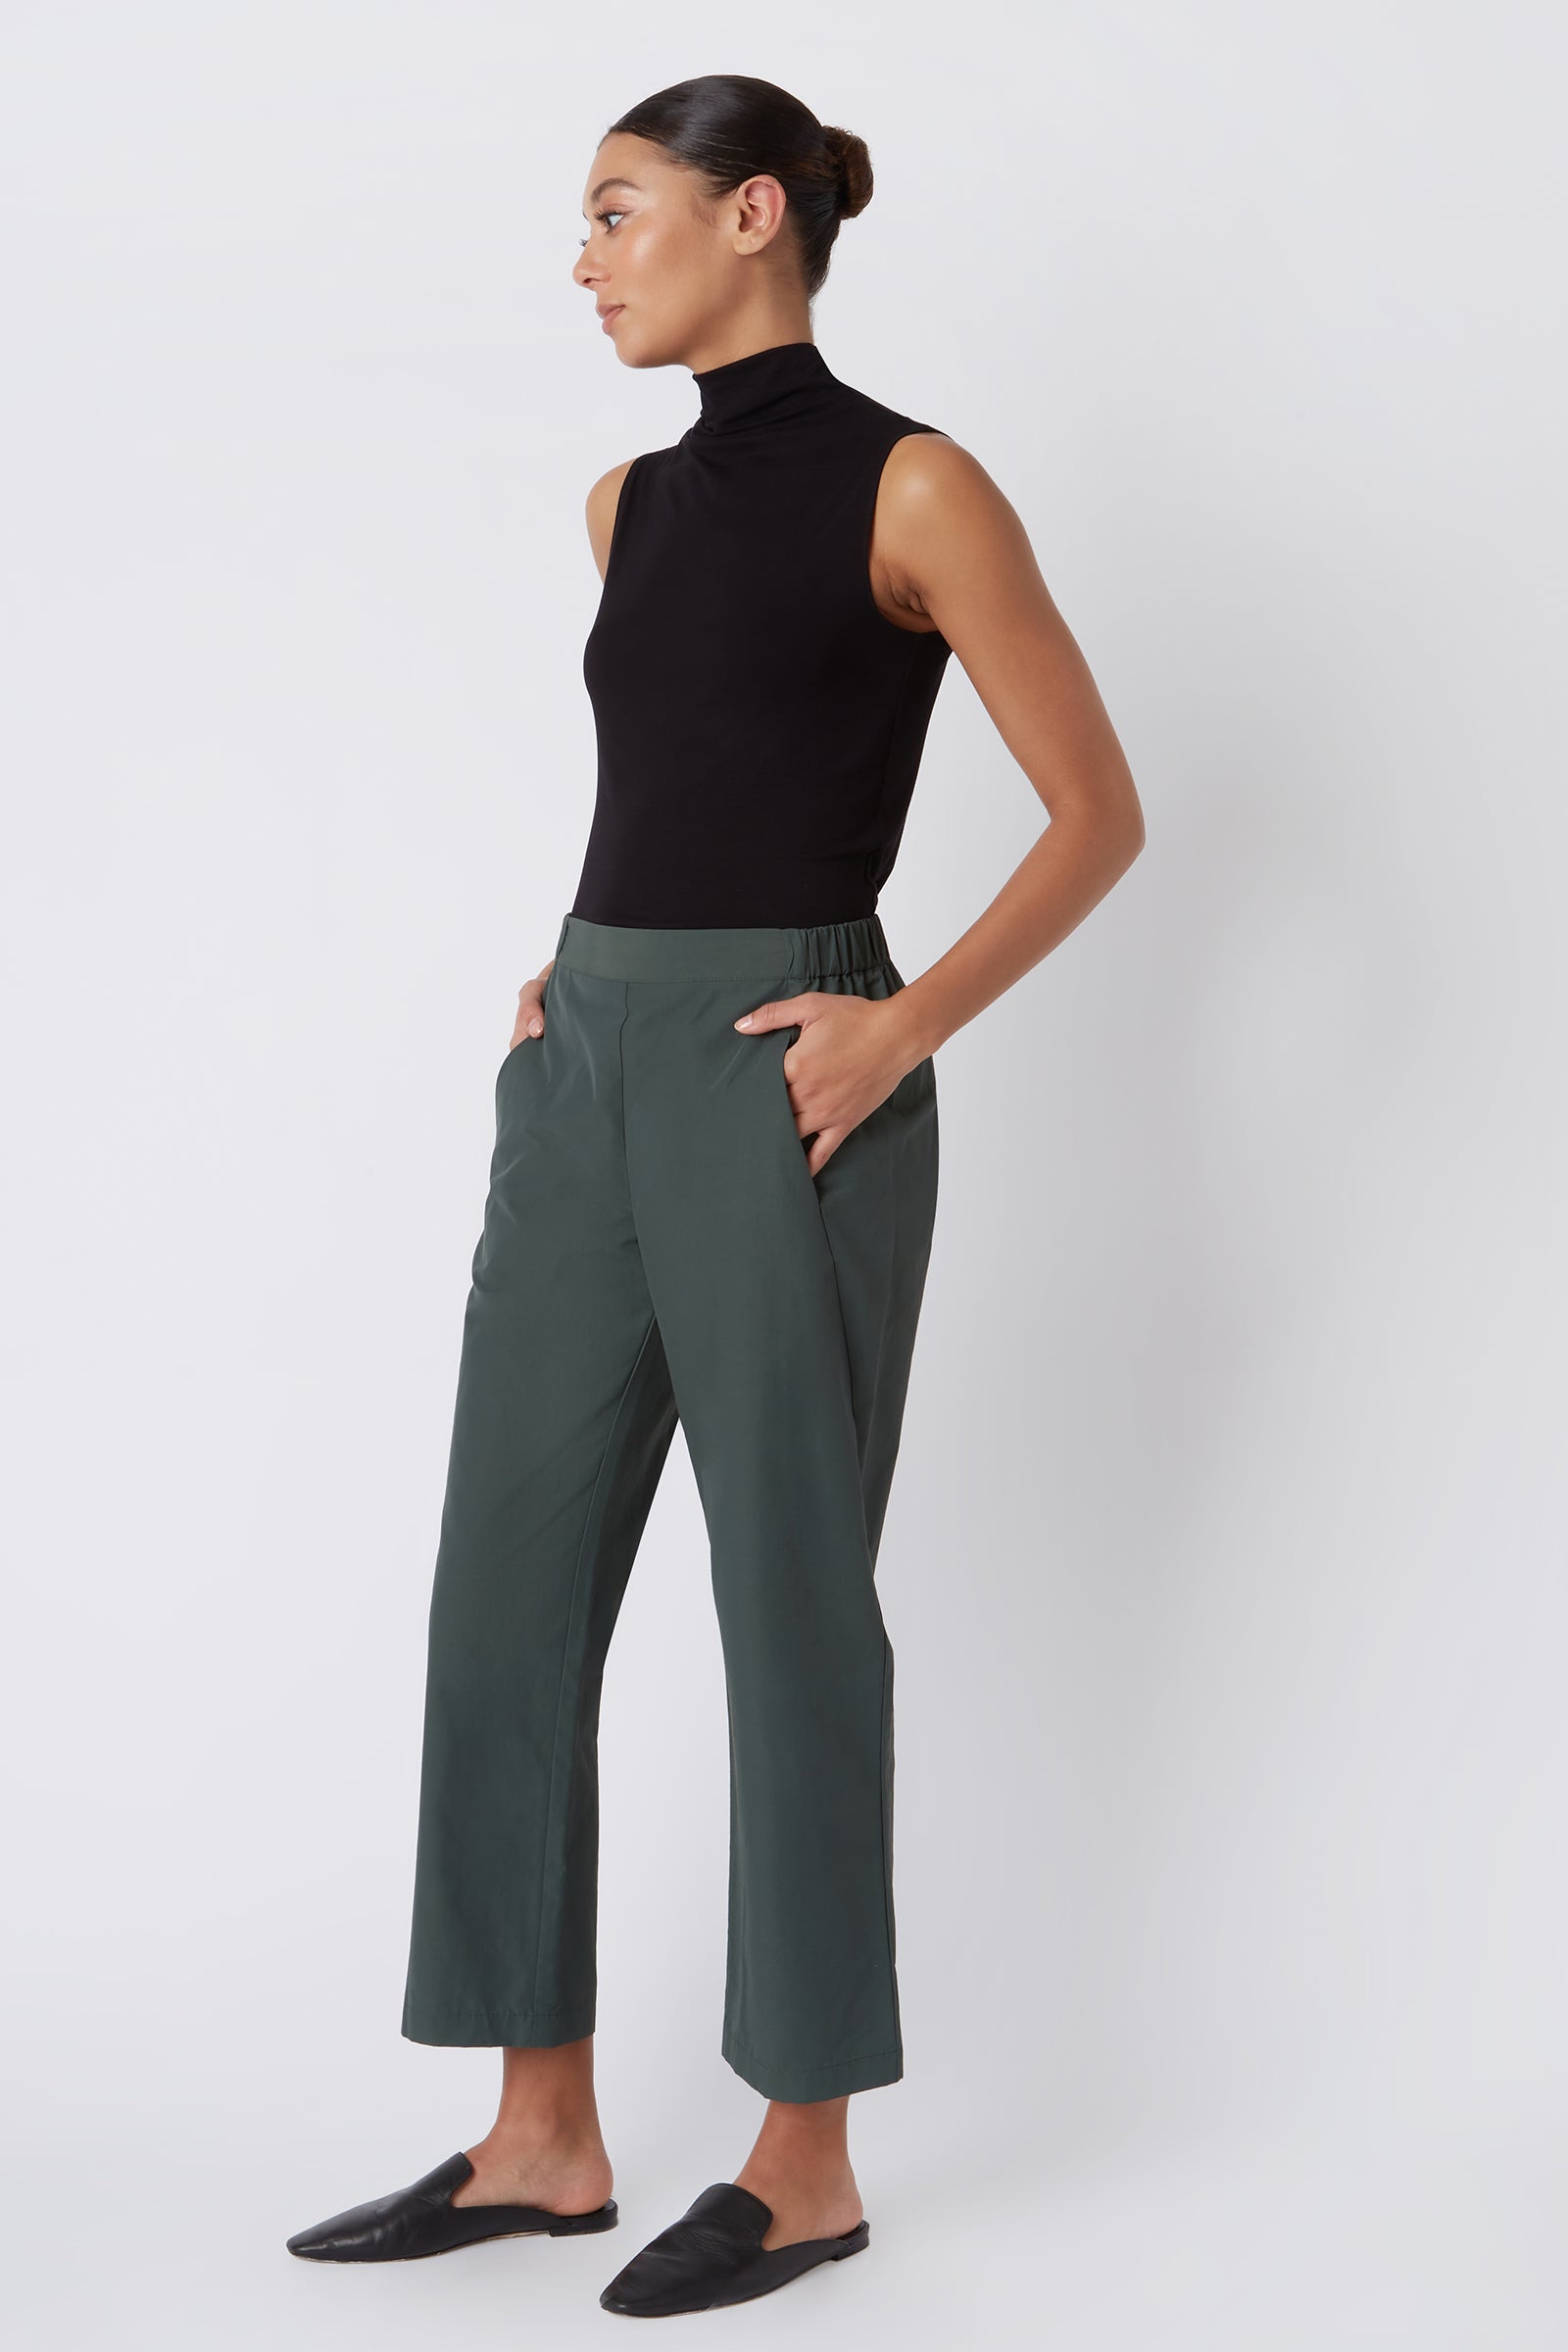 Fit & Flare Seam Front Dress Pants